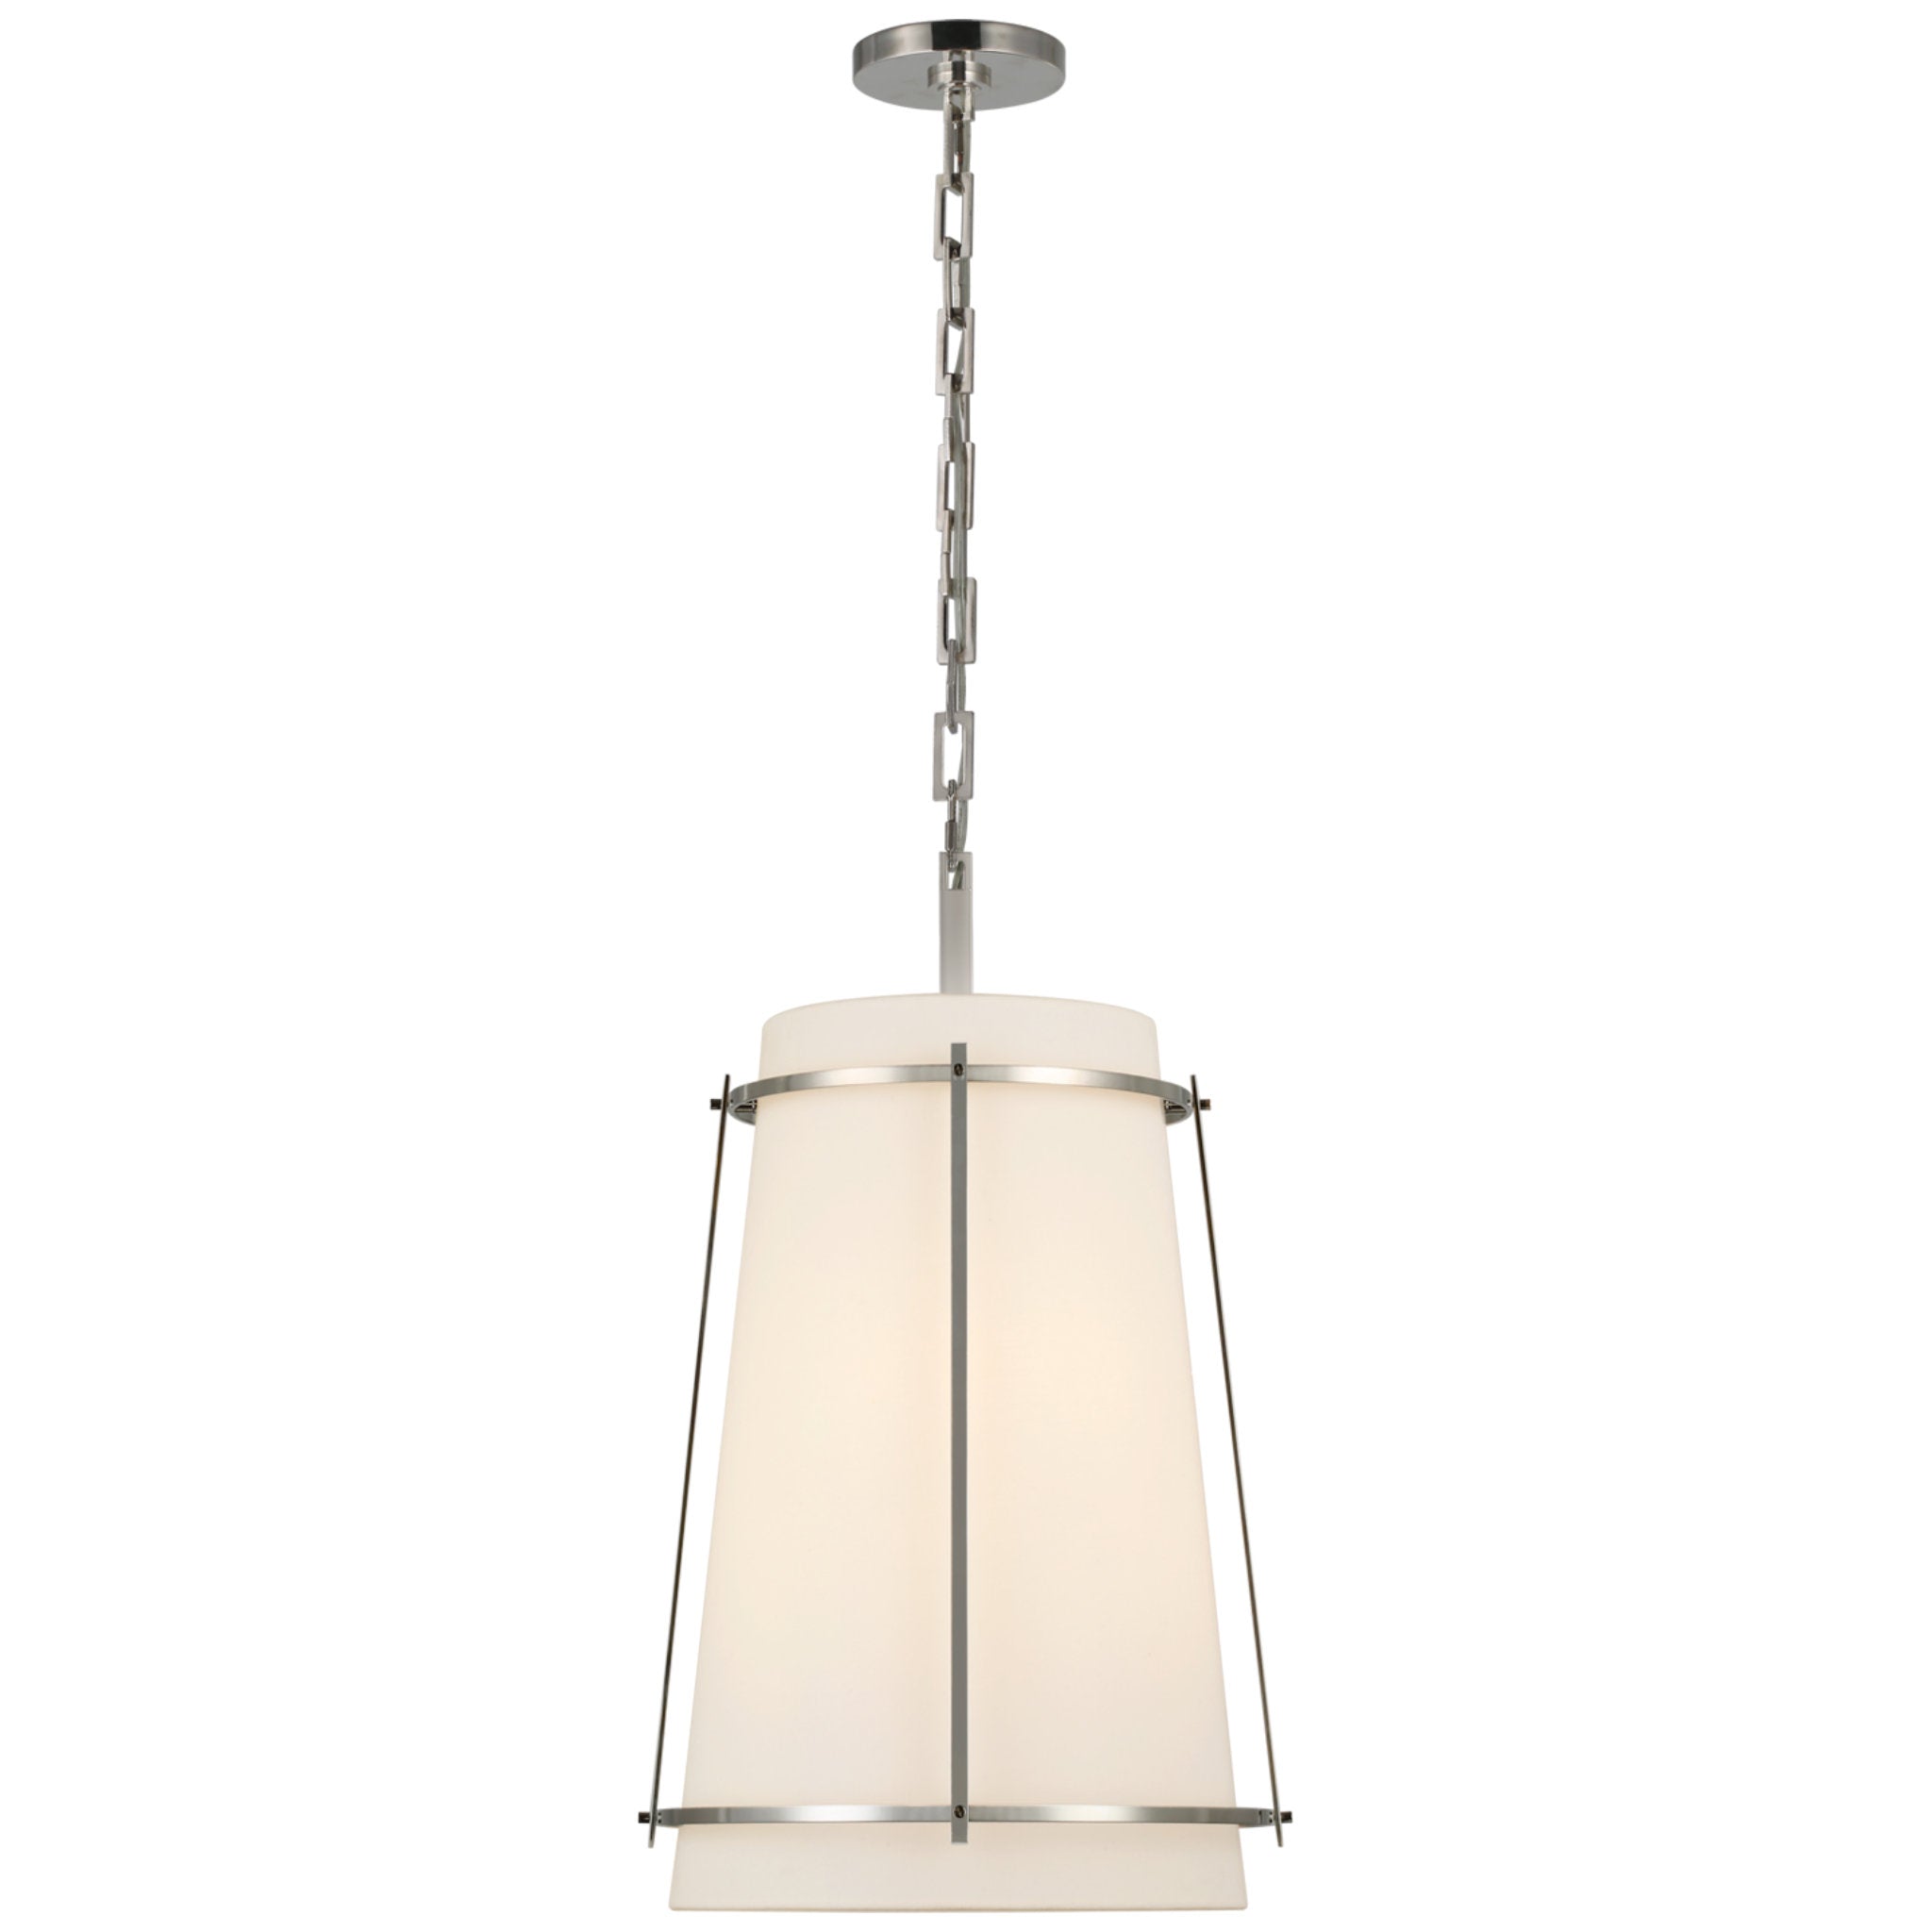 Carrier and Company Callaway Medium Hanging Shade in Polished Nickel with Linen Shade and Frosted Acrylic Diffuser